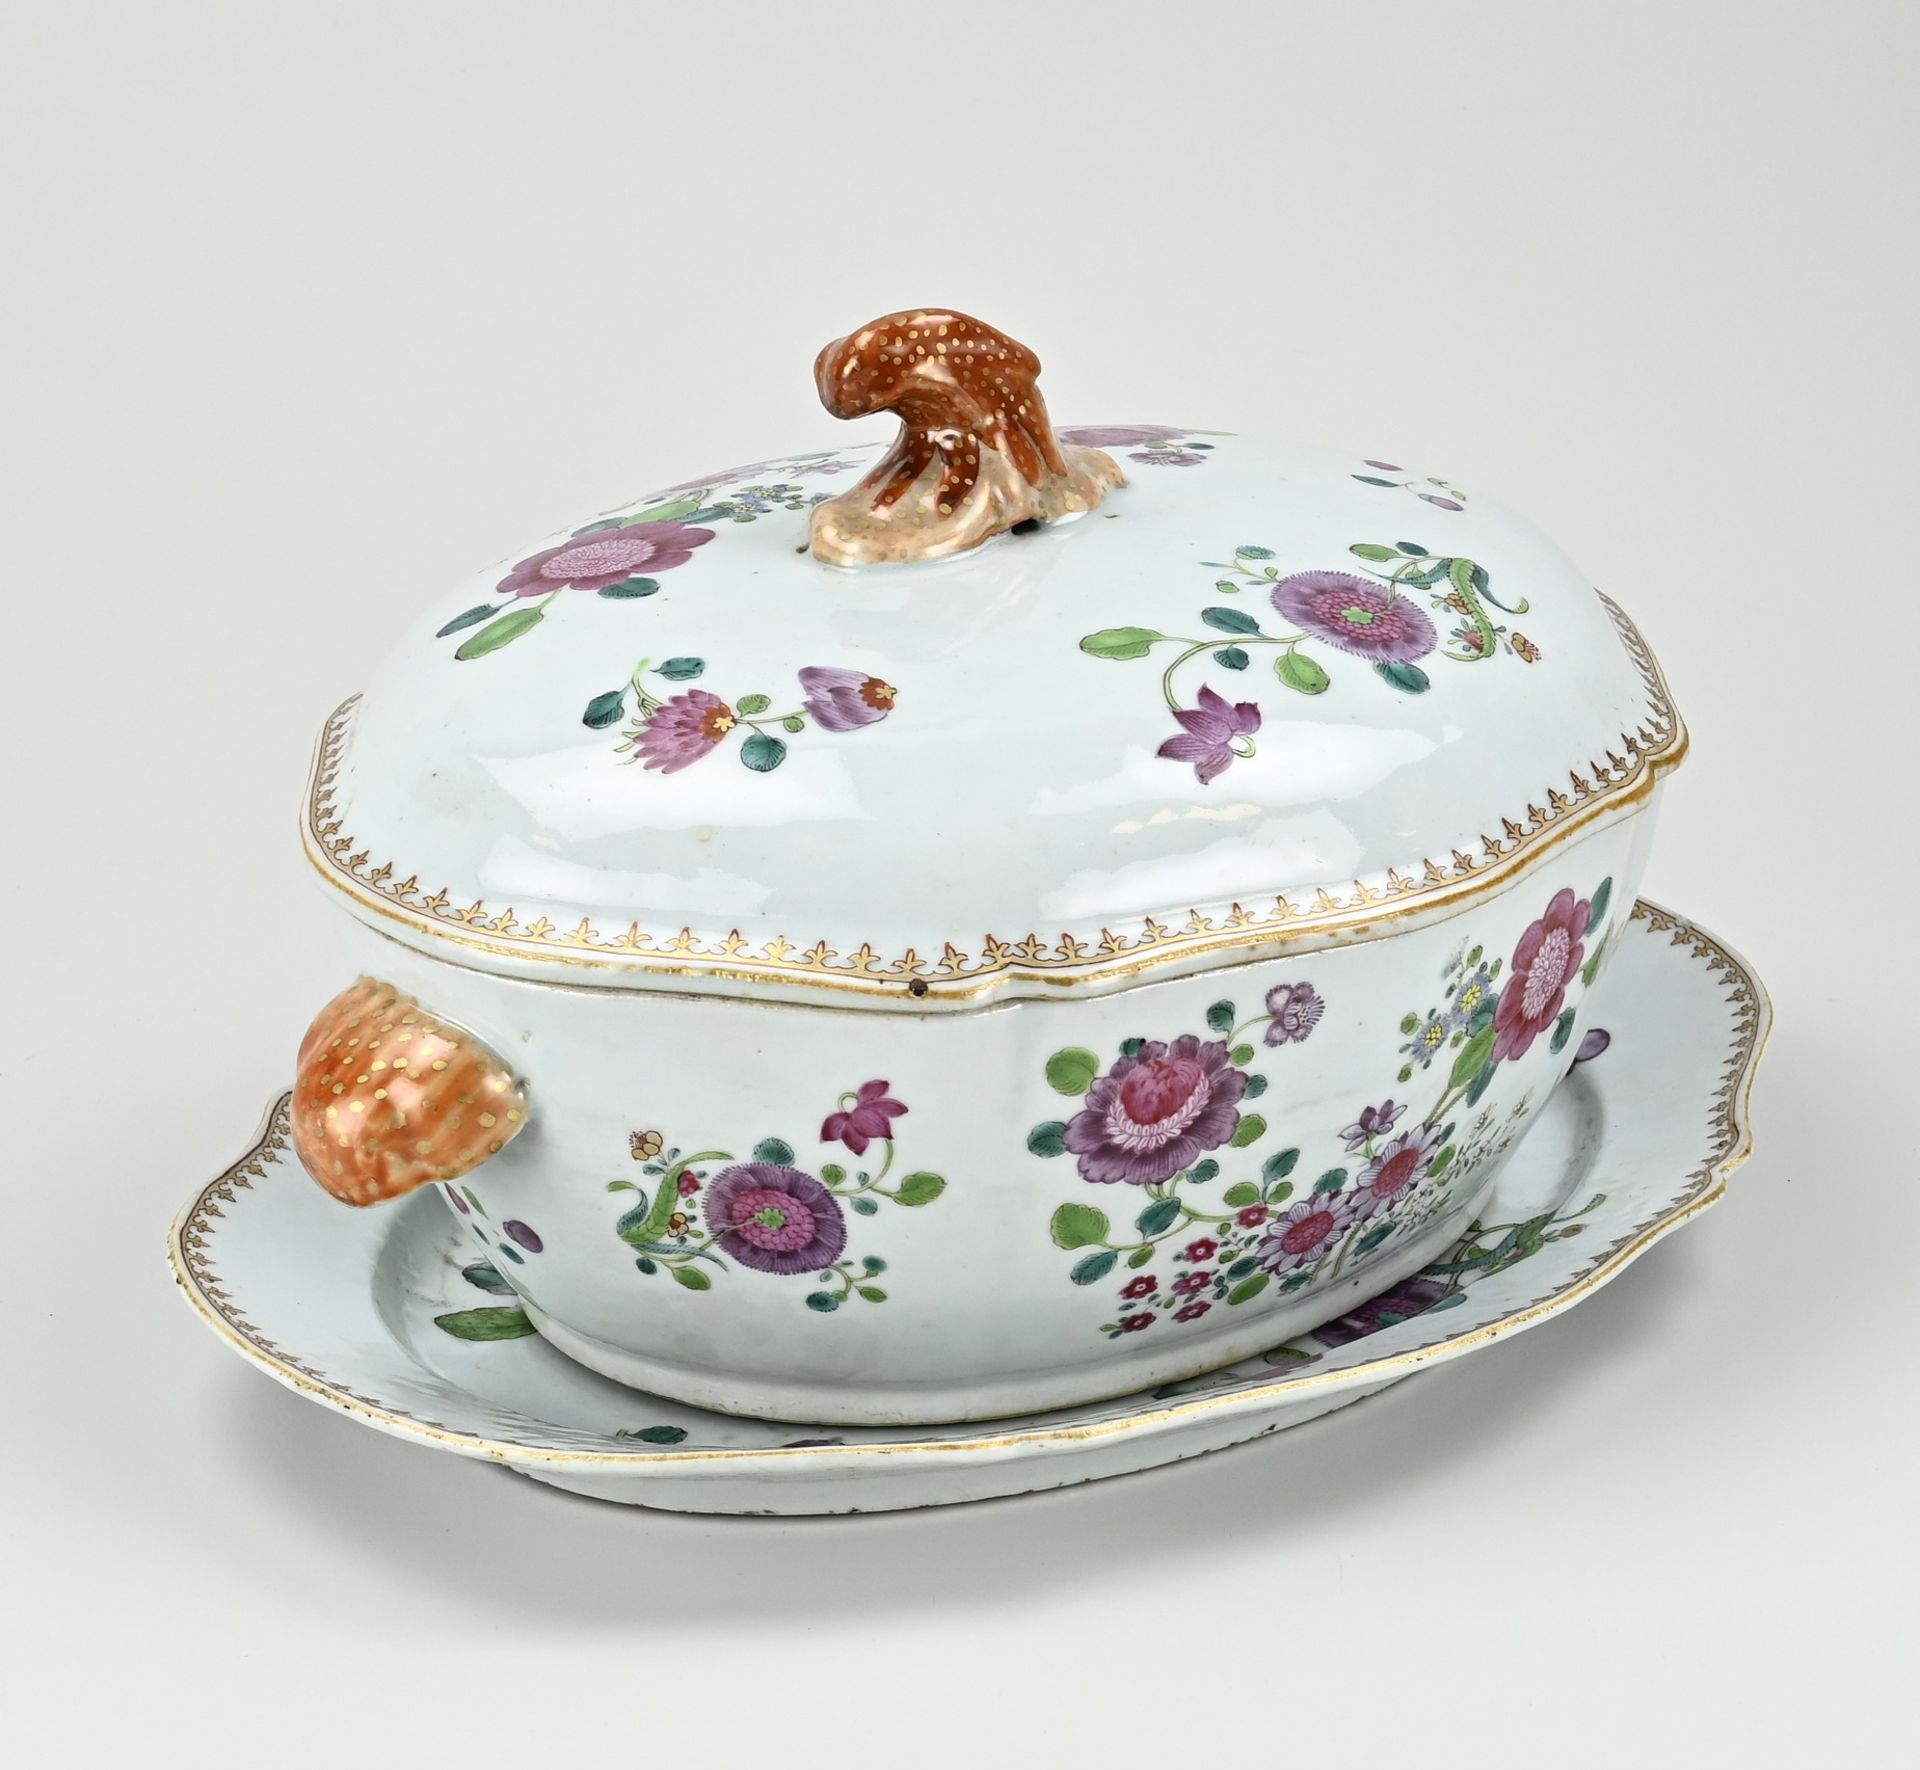 18th century Chinese tureen with lid - Image 2 of 3